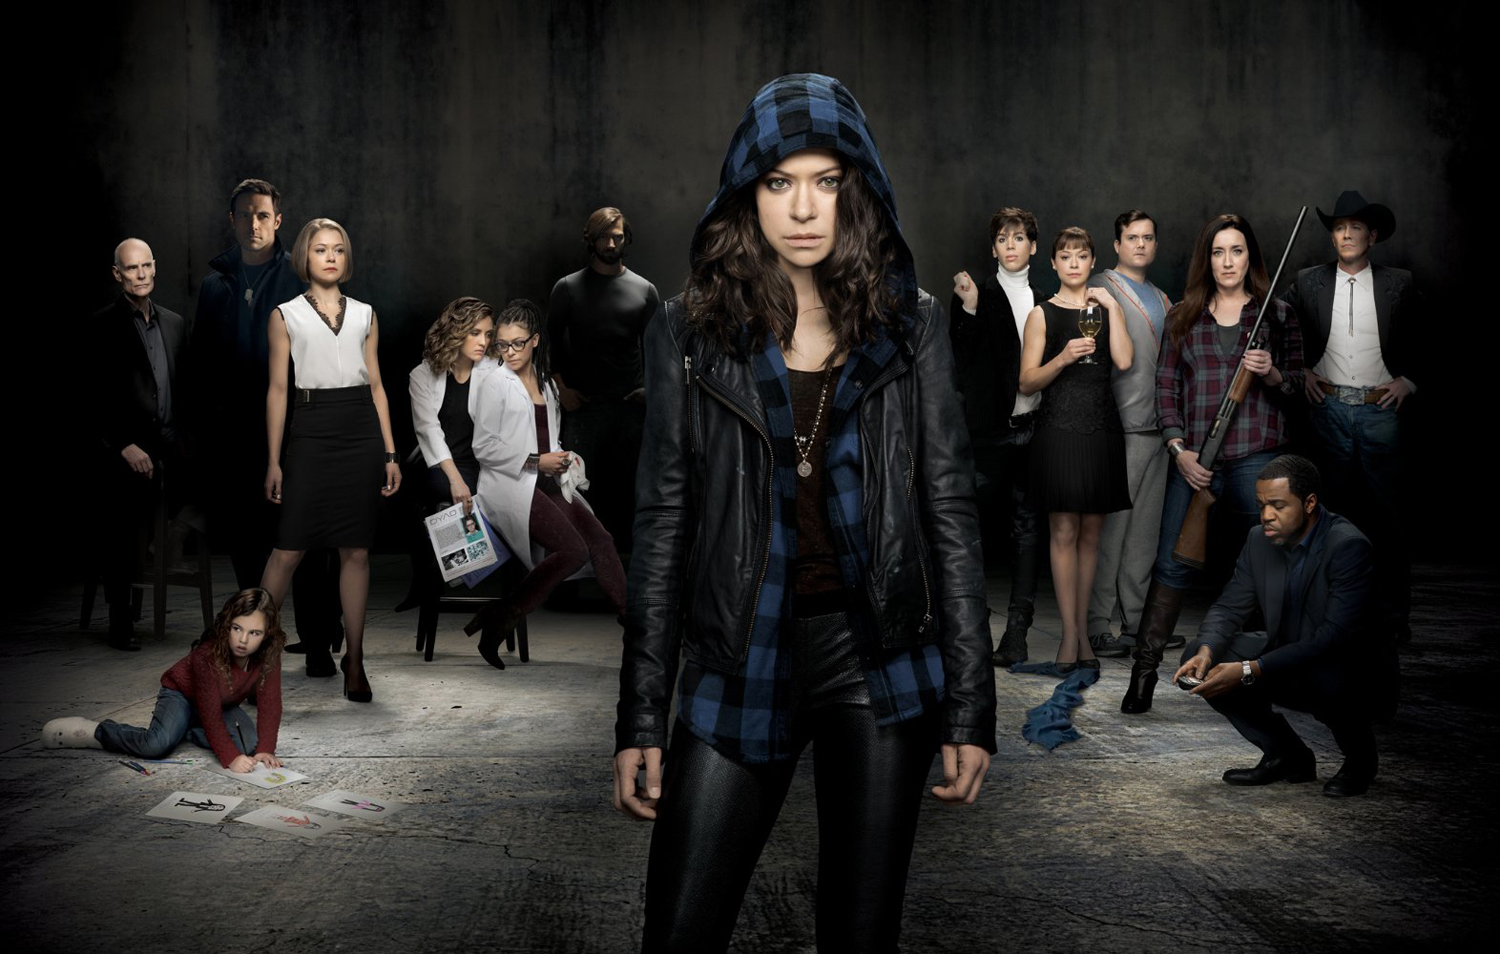 The cast of Orphan Black